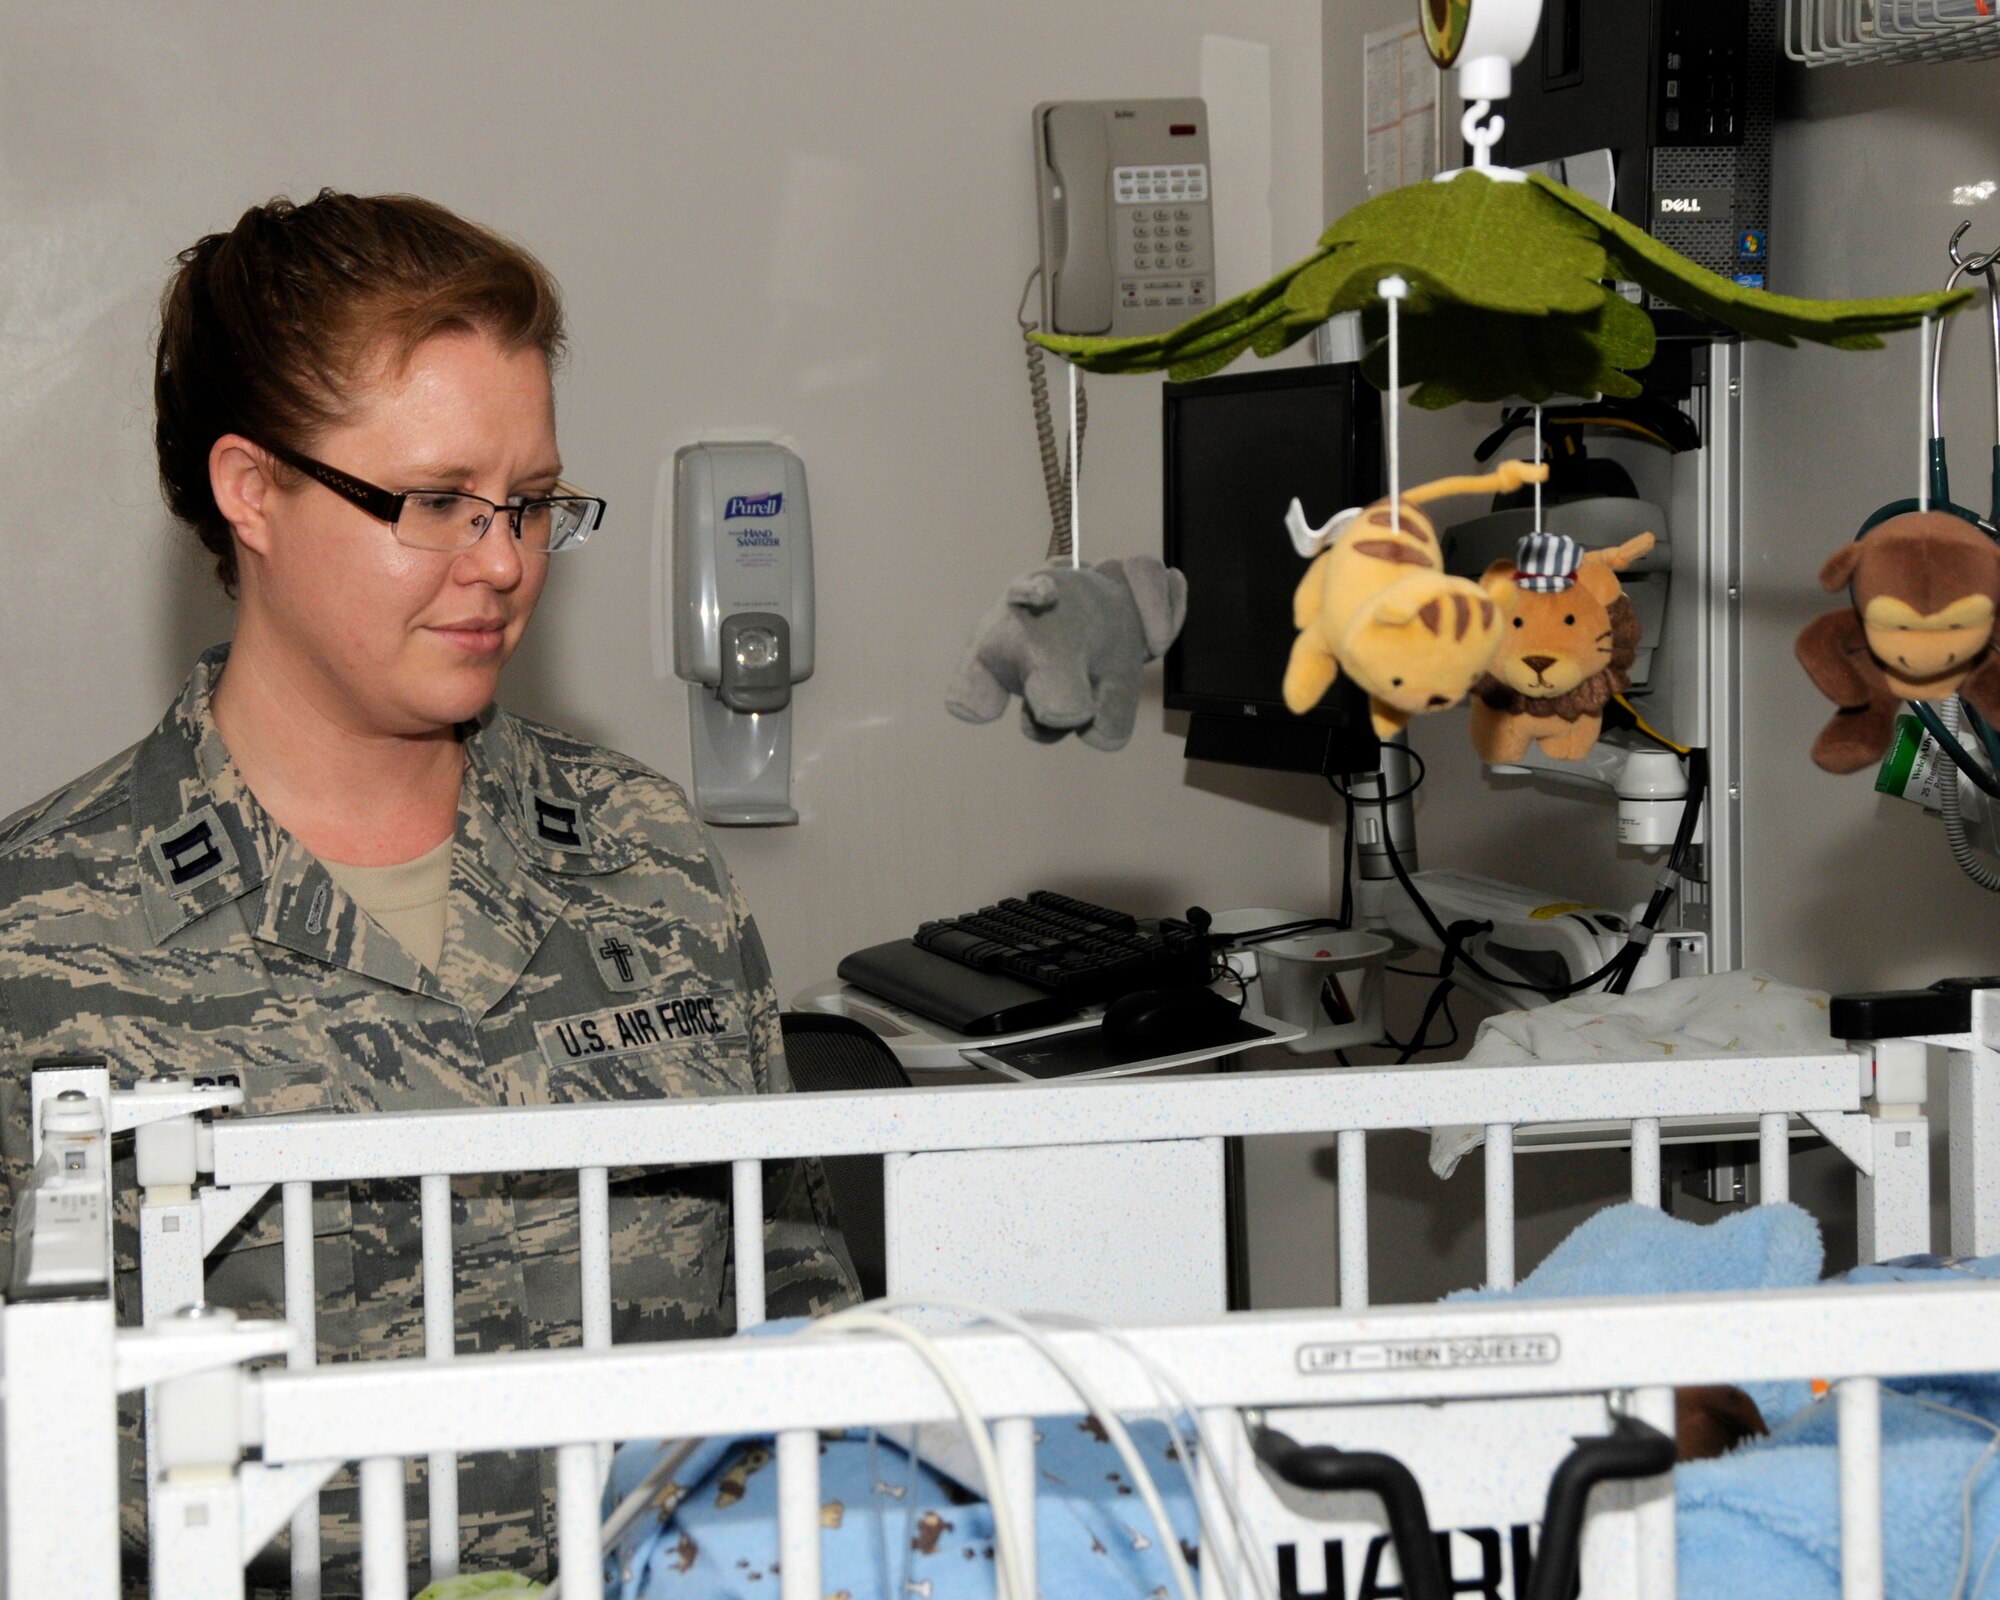 U. S. Air Force Captain (Chaplain) Kristi Hopp, 182nd Airlift Wing, Peoria, Illinois, looks over a newborn in the neonatal unit of Tripler Army Medical Center, Hawaii, Sep. 12, 2014. Chaplain Hopp is performing her two weeks of Annual Training with the 182nd Medical Group's Overseas Annual Training (OSAT) held at Tripler. (U.S. Air National Guard photo by Tech. Sgt. Todd Pendleton) (Released)  